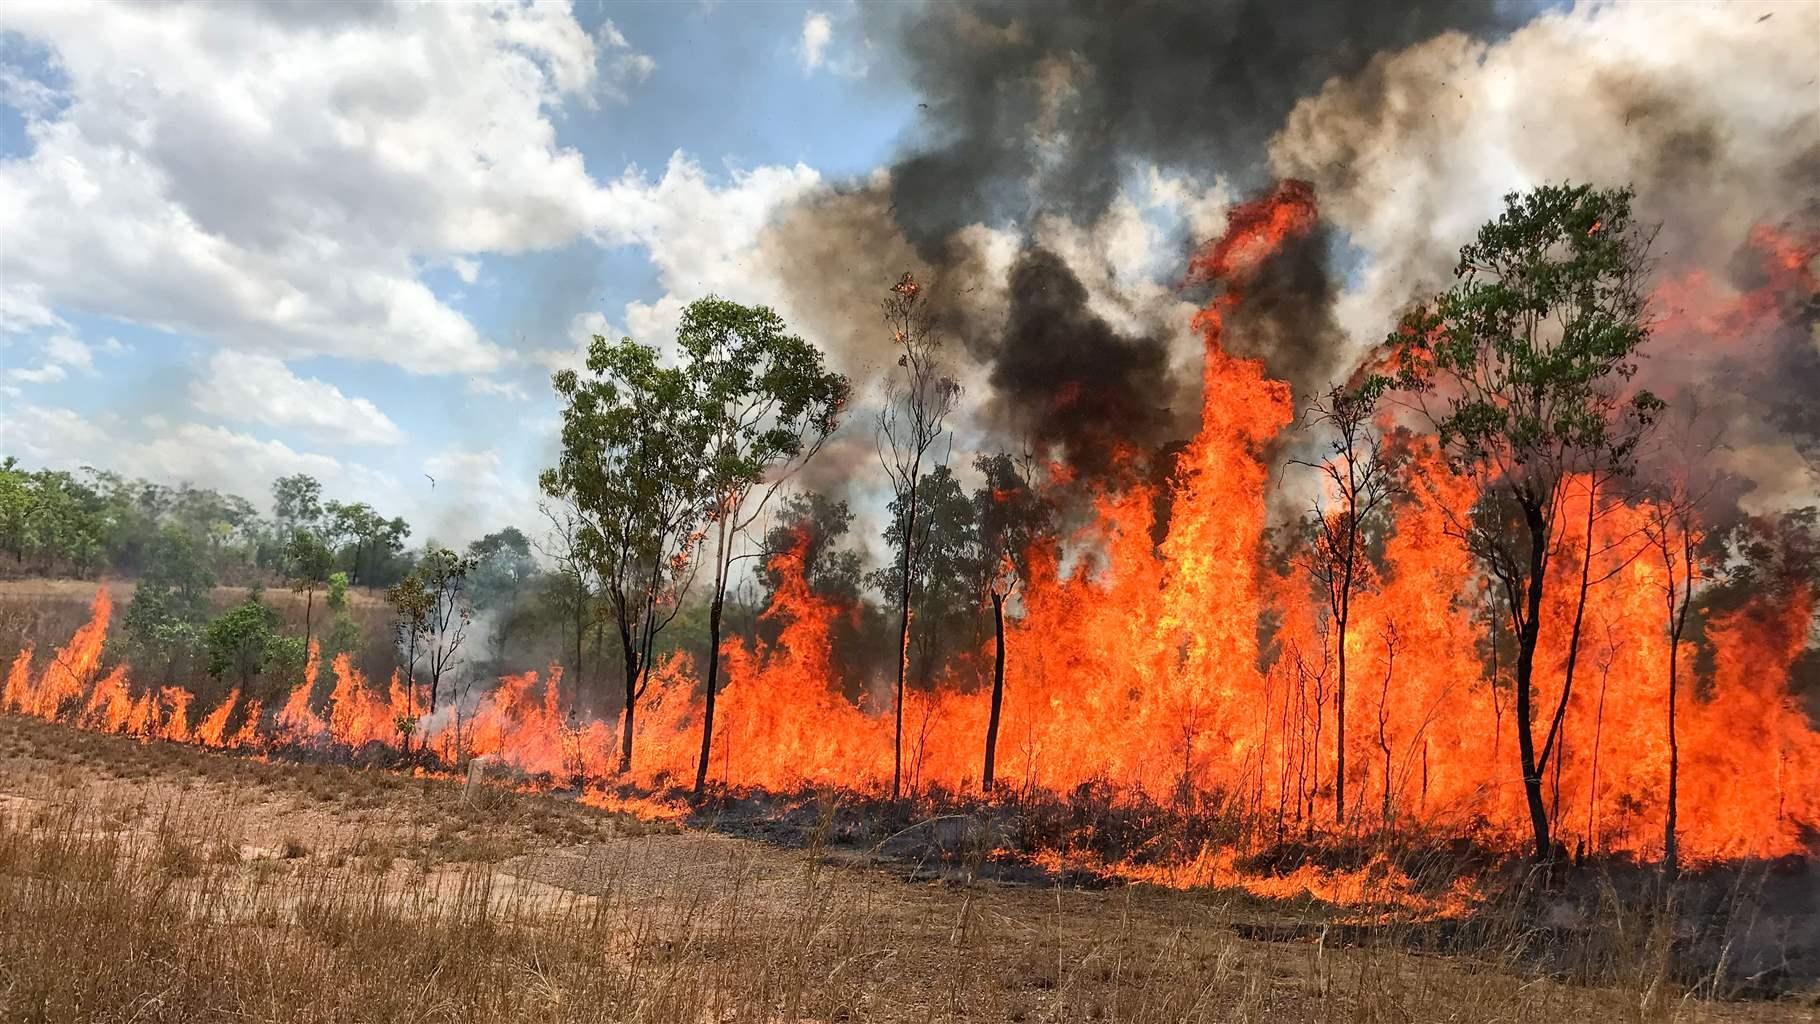 Intense flames and black smoke rise from an area of savannah woodland infested with tall grass.